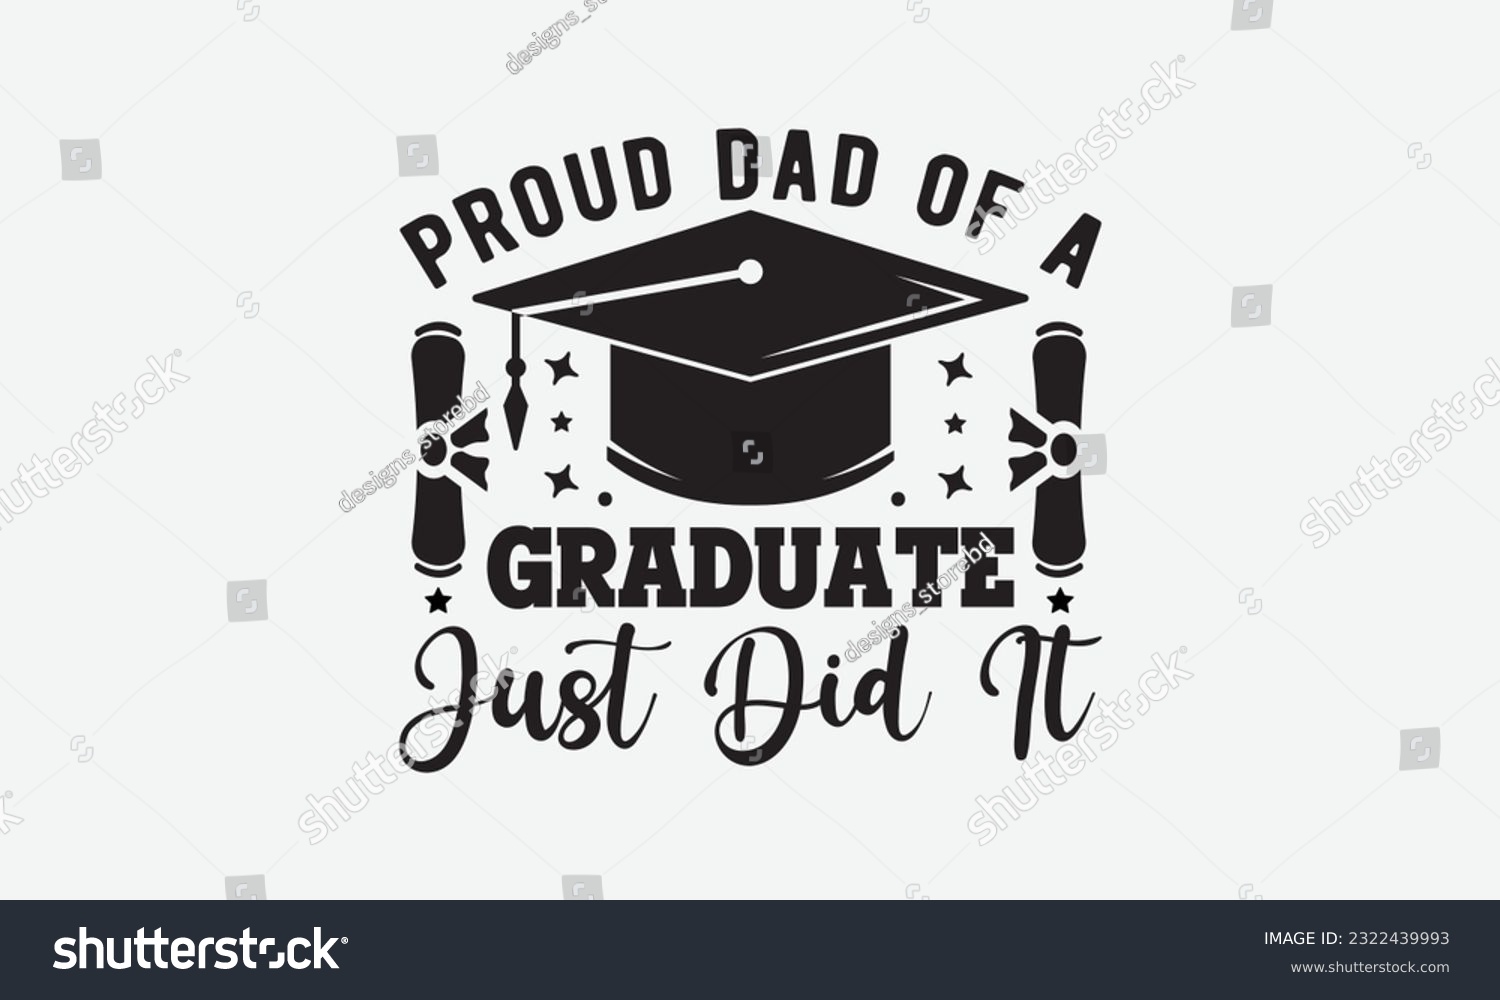 SVG of Proud dad of a graduate just did it svg, Graduation SVG , Class of 2023 Graduation SVG Bundle, Graduation cap svg, T shirt Calligraphy phrase for Christmas, Hand drawn lettering for Xmas greetings car svg